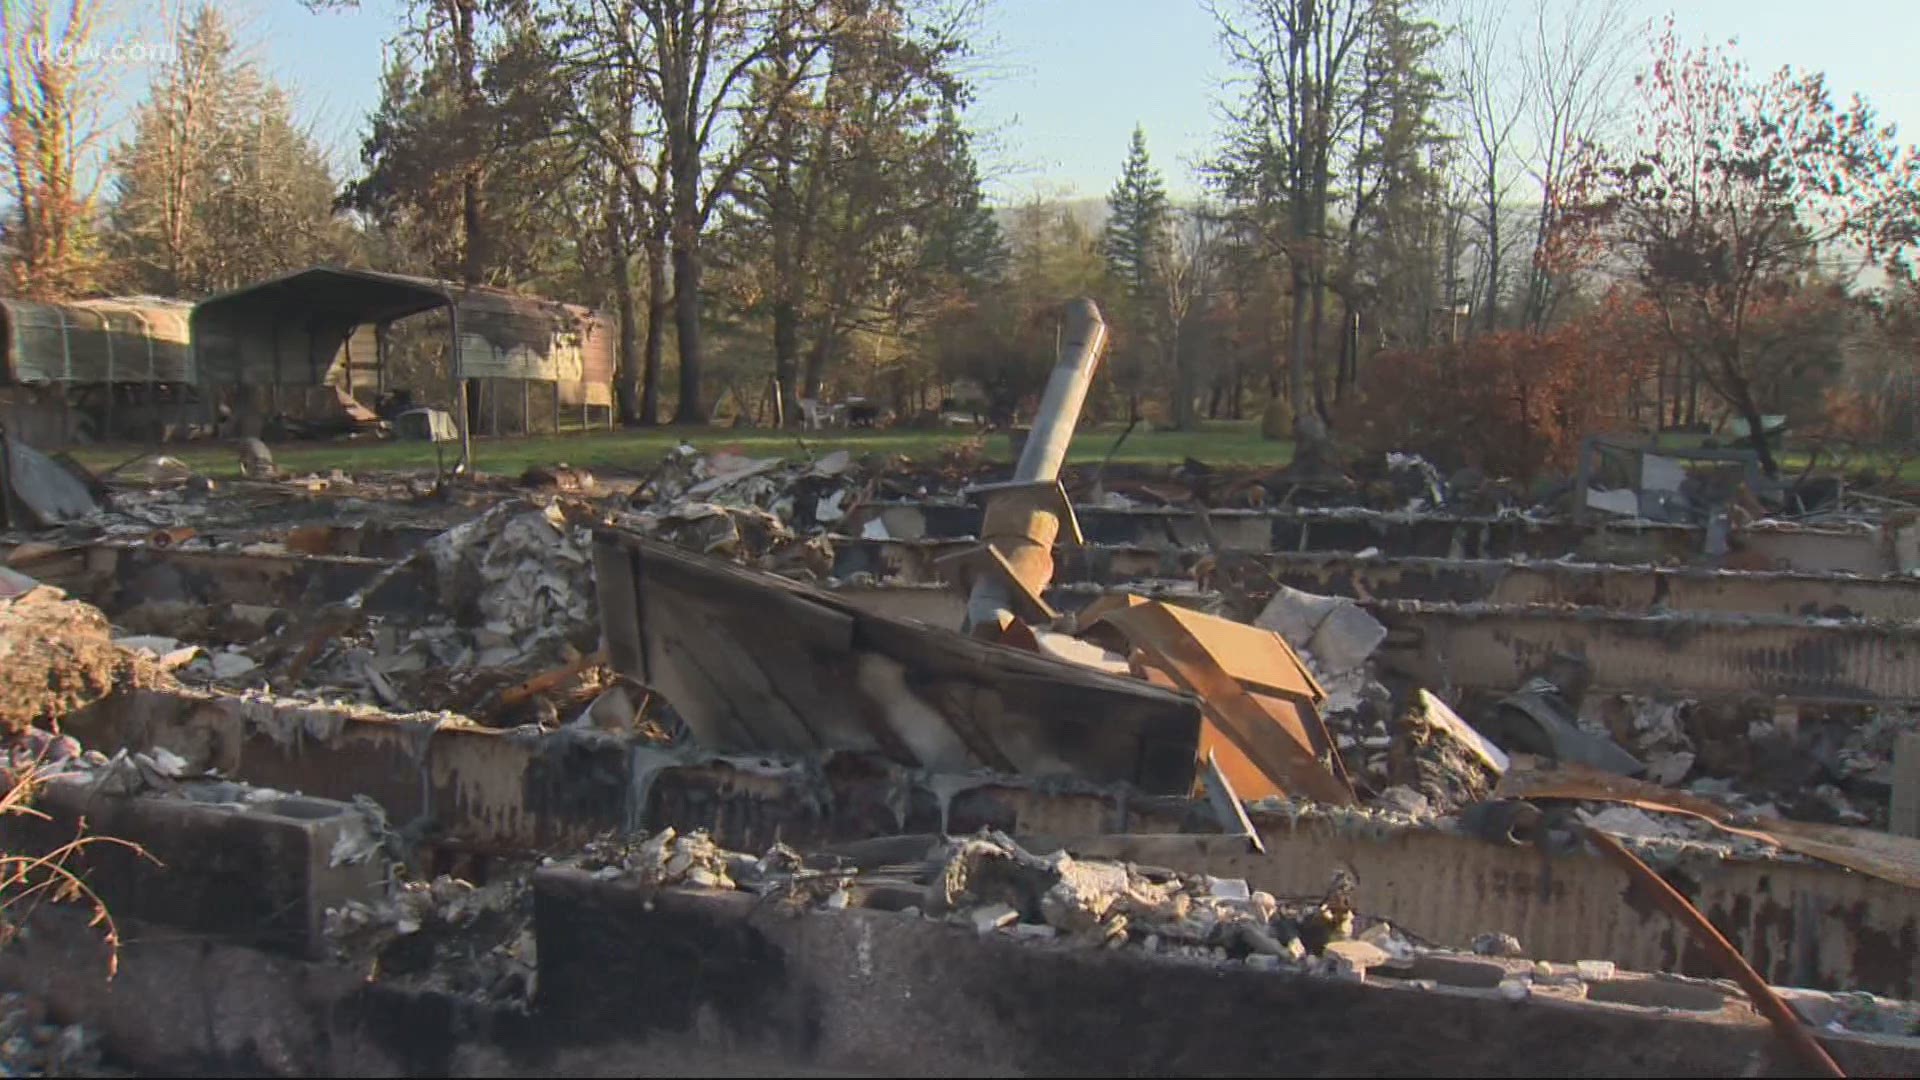 State, local and national leaders get a first-hand look at wildfire devastation.